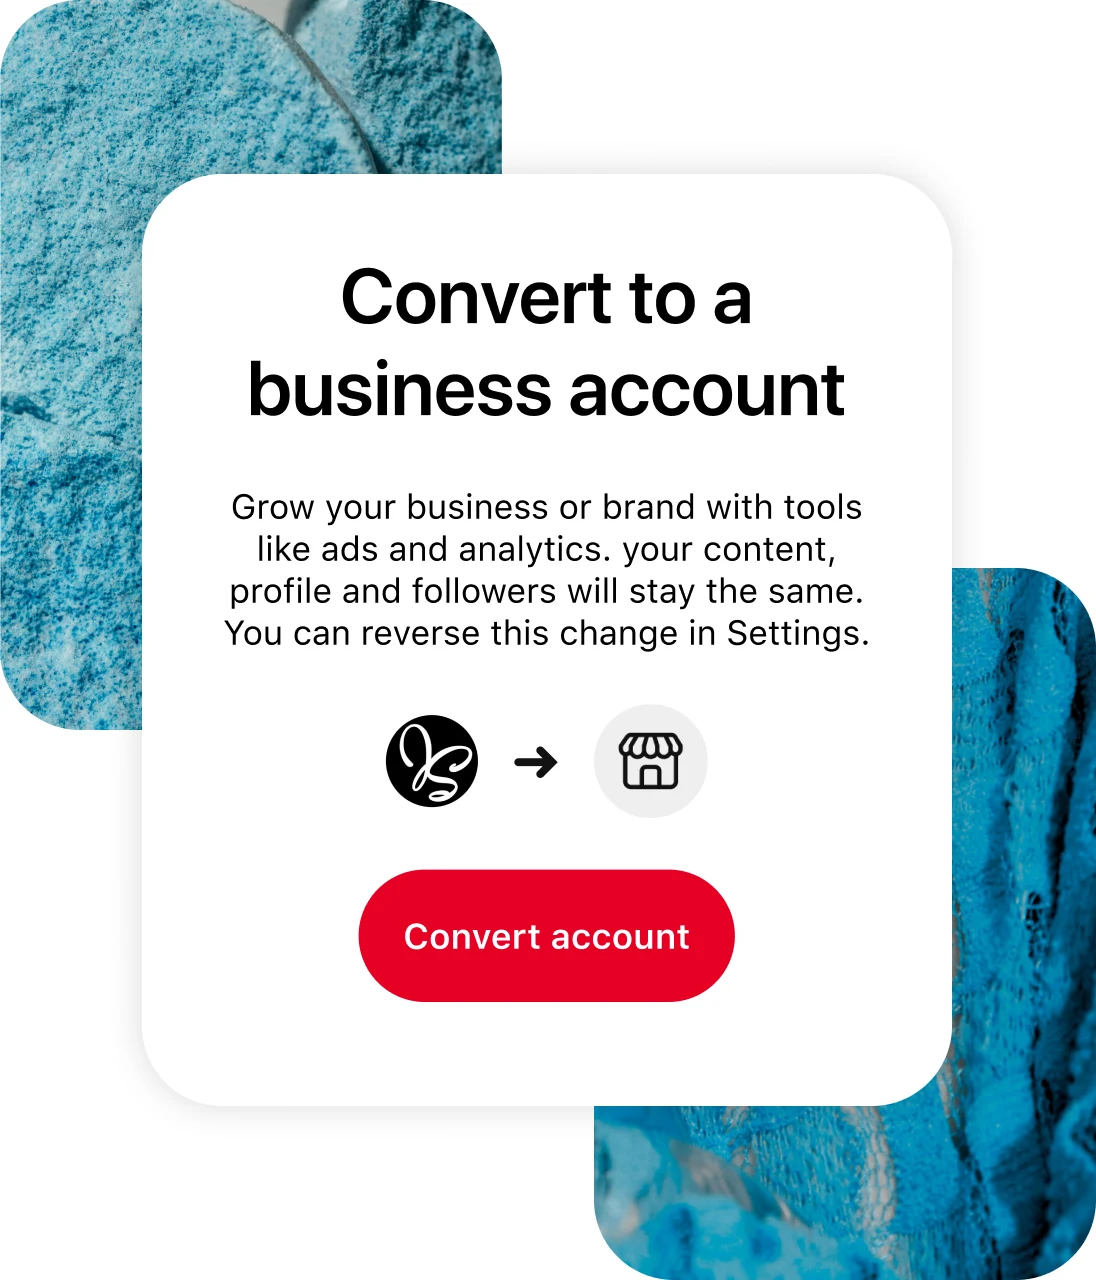 Pinterest app screen showing how to convert to business account